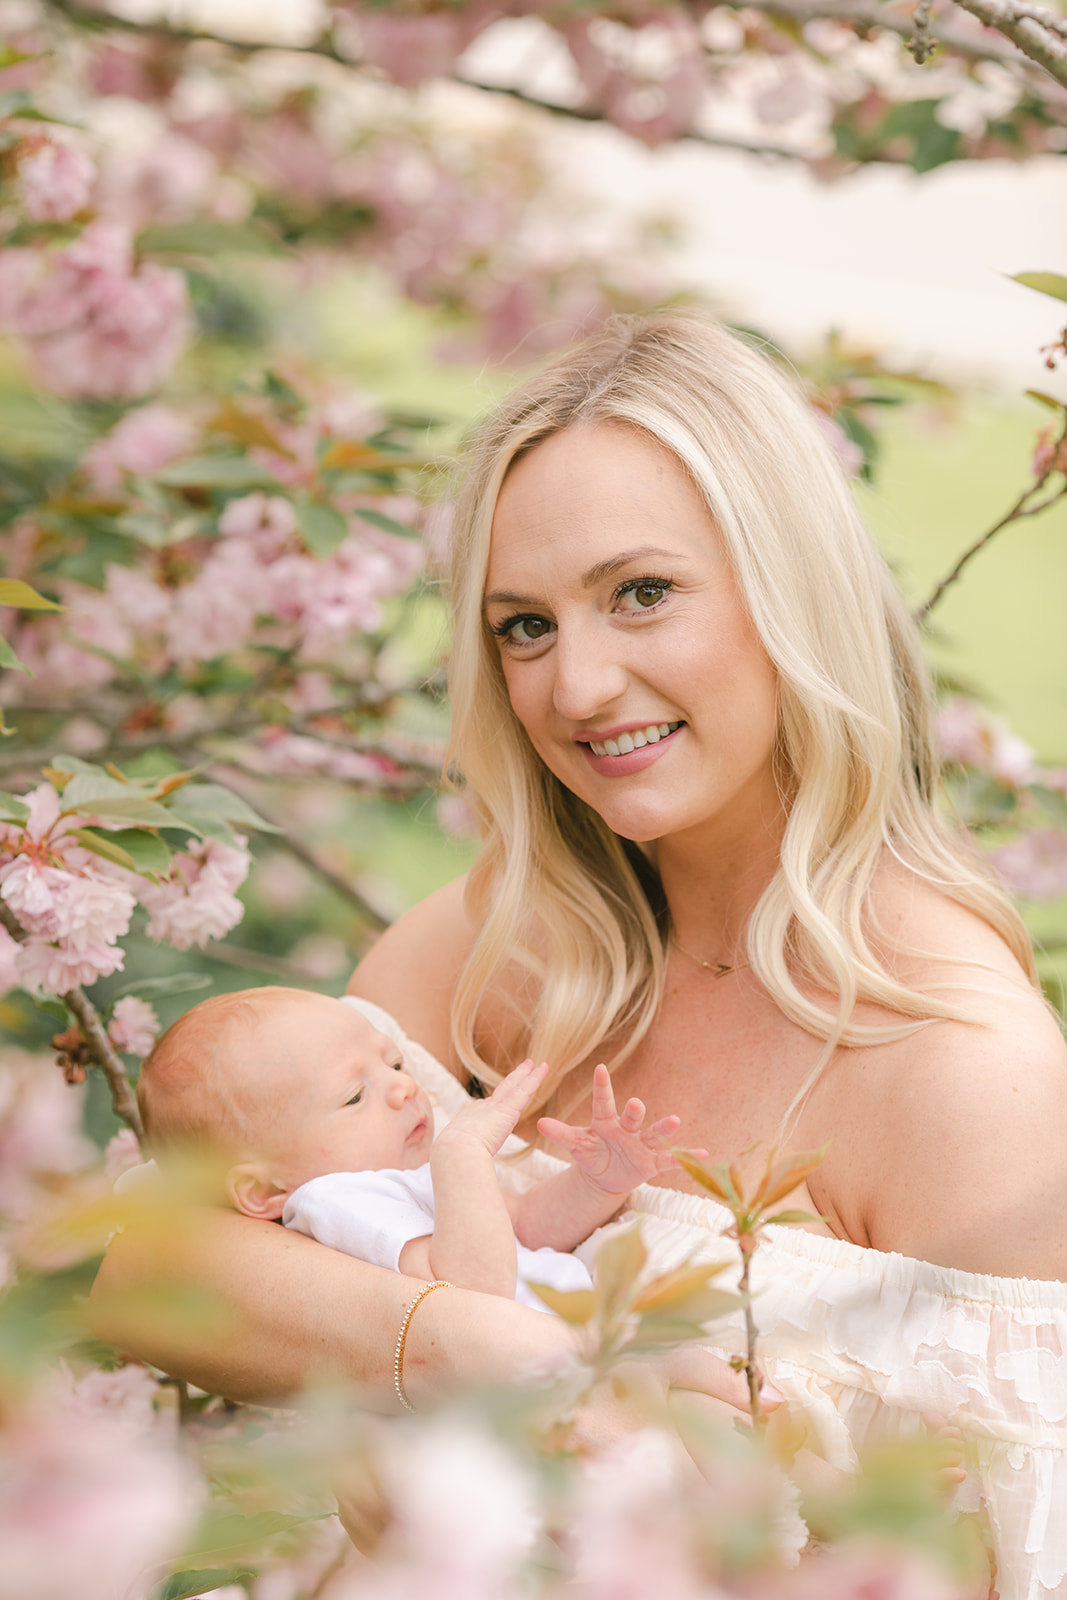 newborn baby session in nashville tennessee. outdoor newborn photo of mom and baby